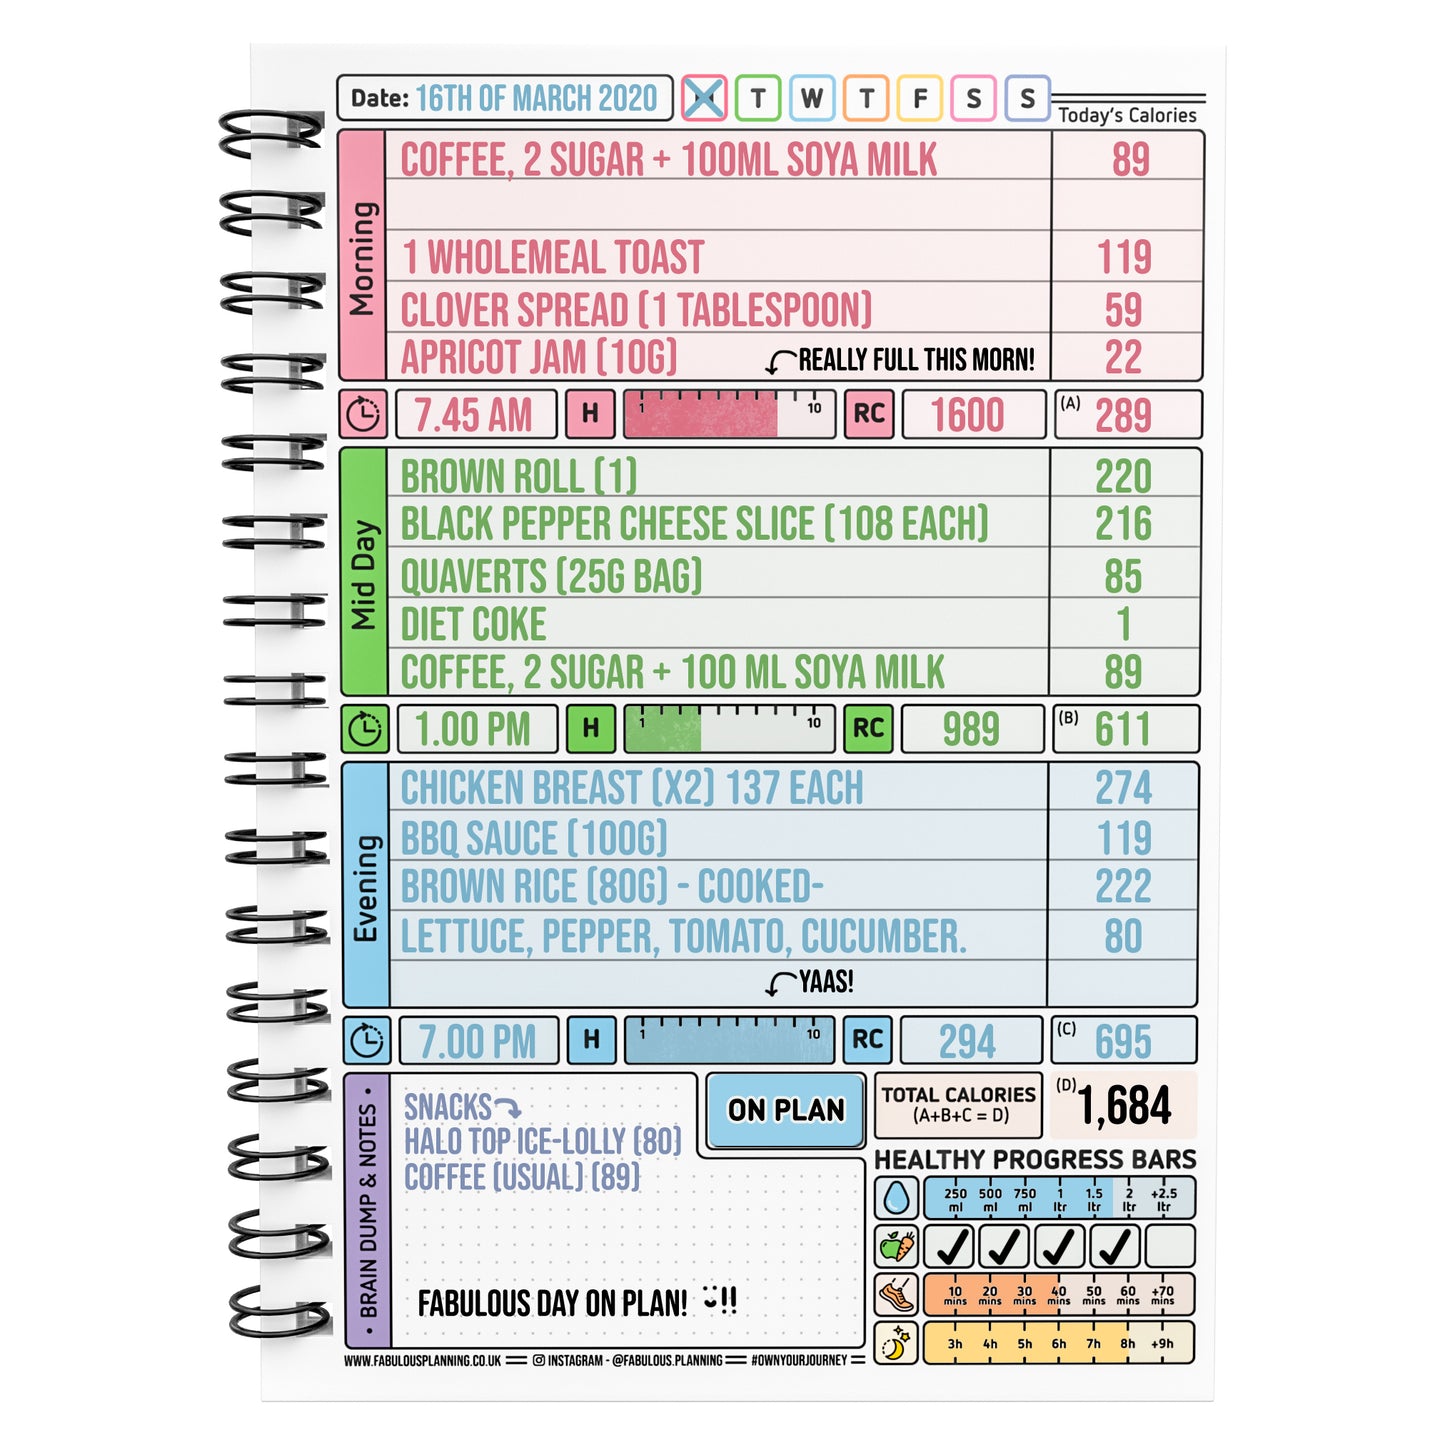 Food Diary - C11 - Calorie Counting